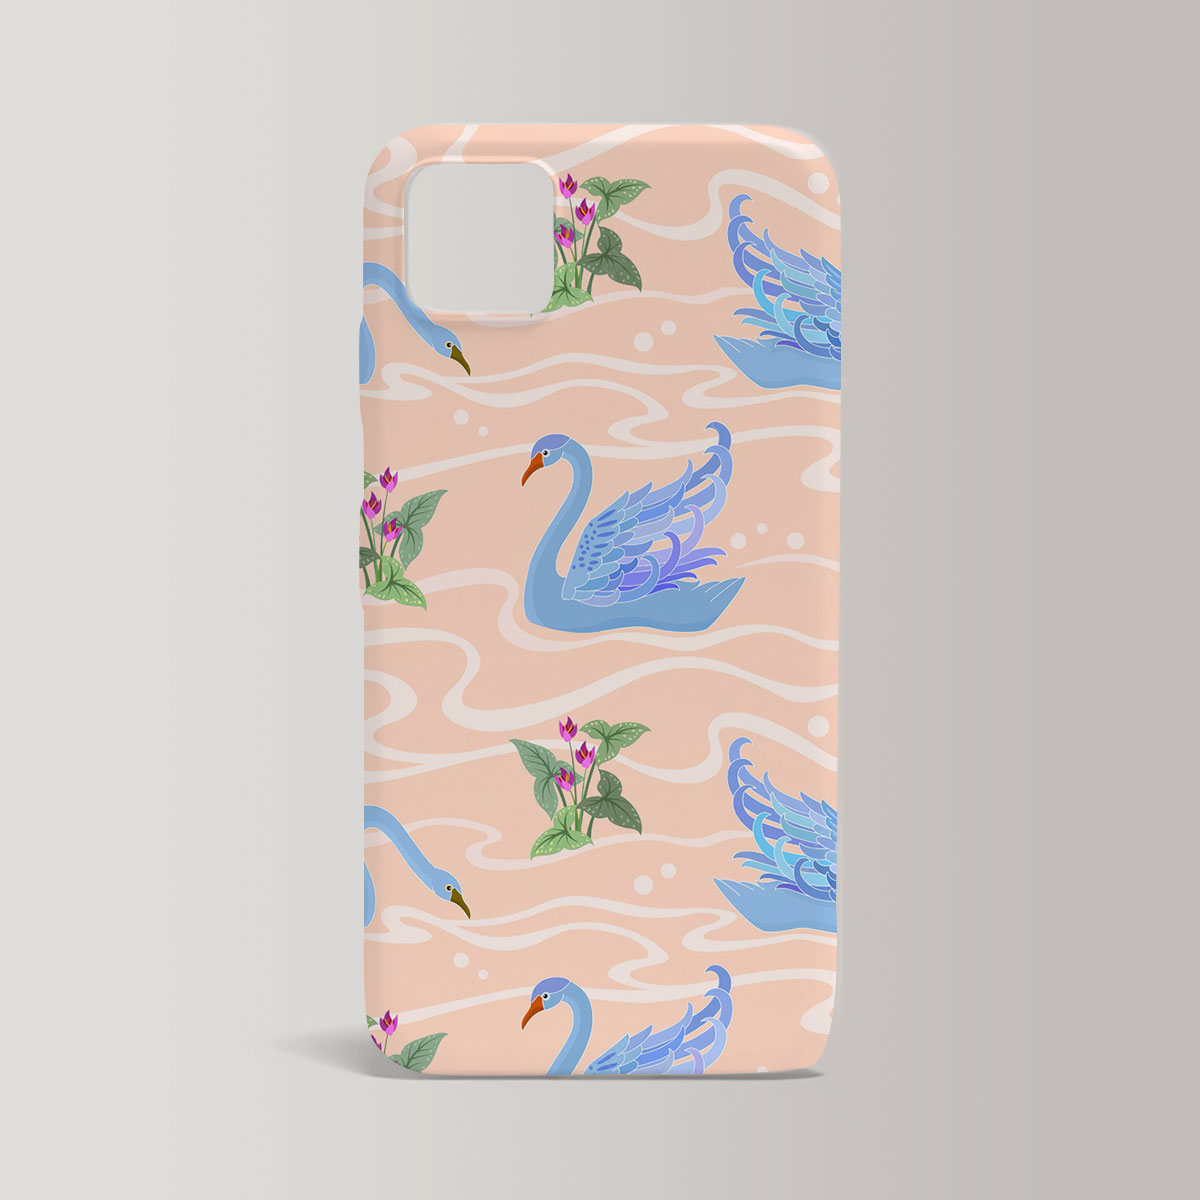 Floating Blue Swan Iphone Case